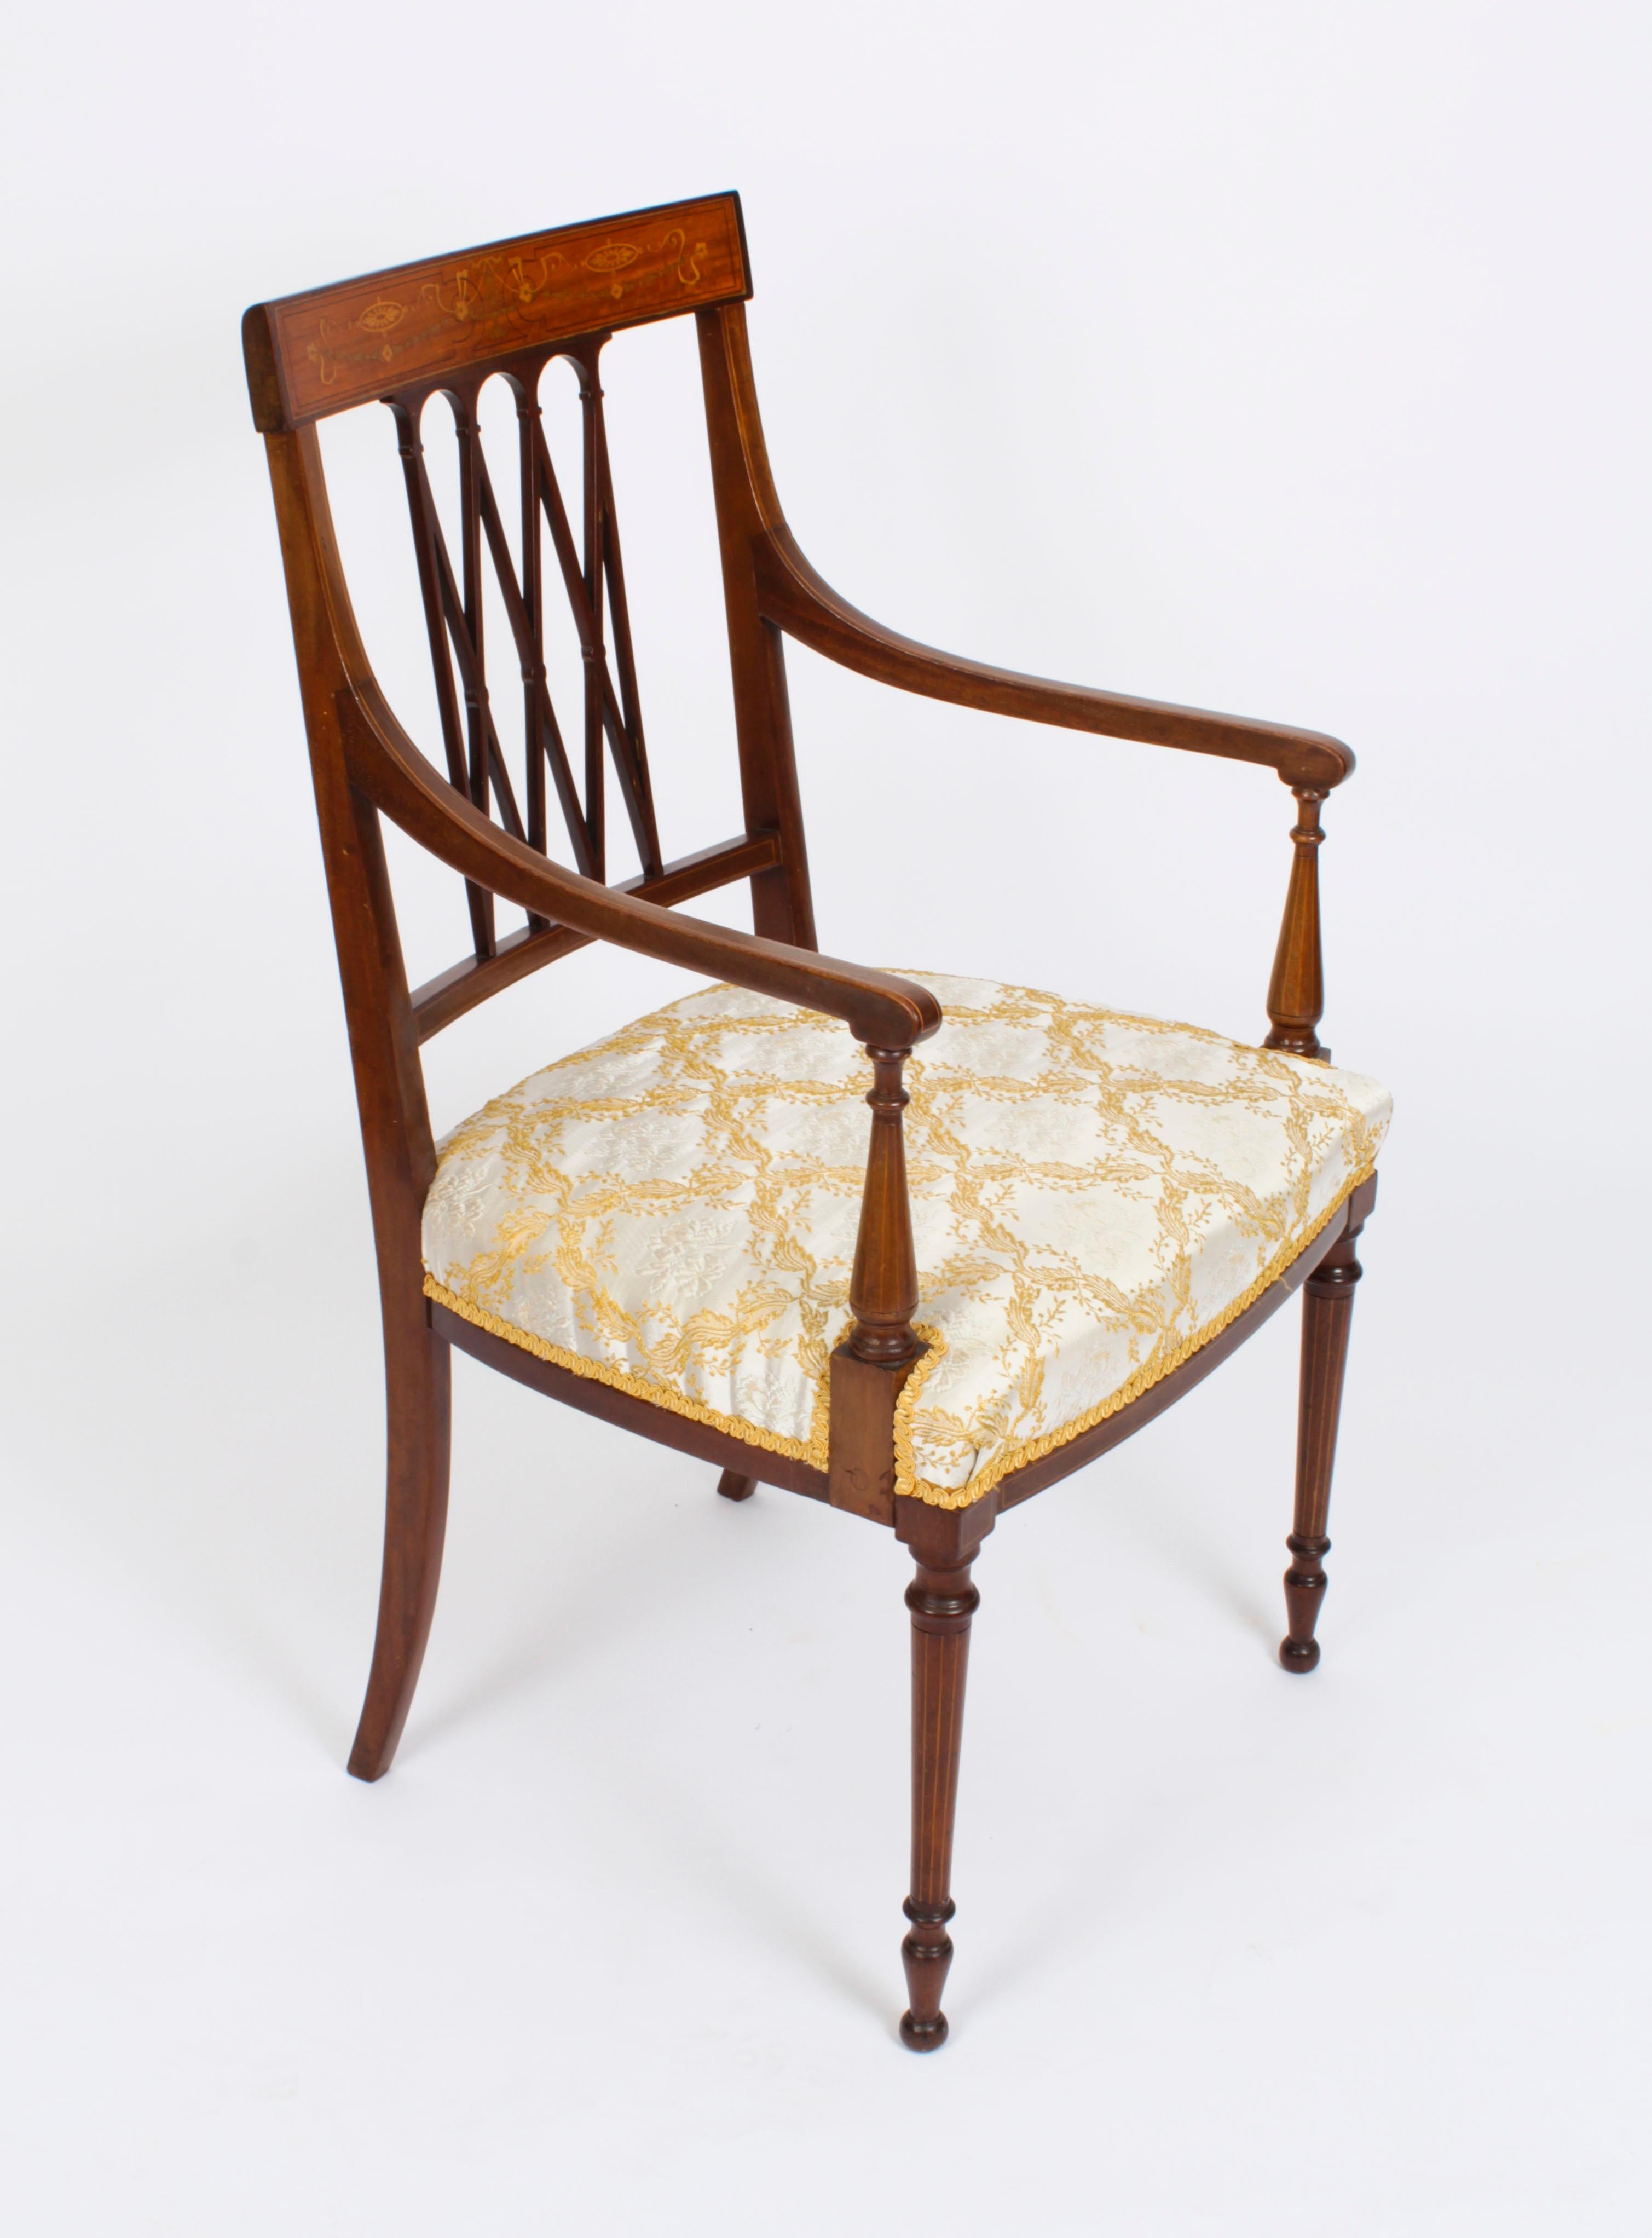 This is a fantastic antique English late Victorian Sheraton Revival side chair, by the renowned retailer and manufacturer, Maple & Co, and Circa 1870 in date.
 
Expertly made out of superb mahogany, with satinwood inlaid marquetry decoration and a